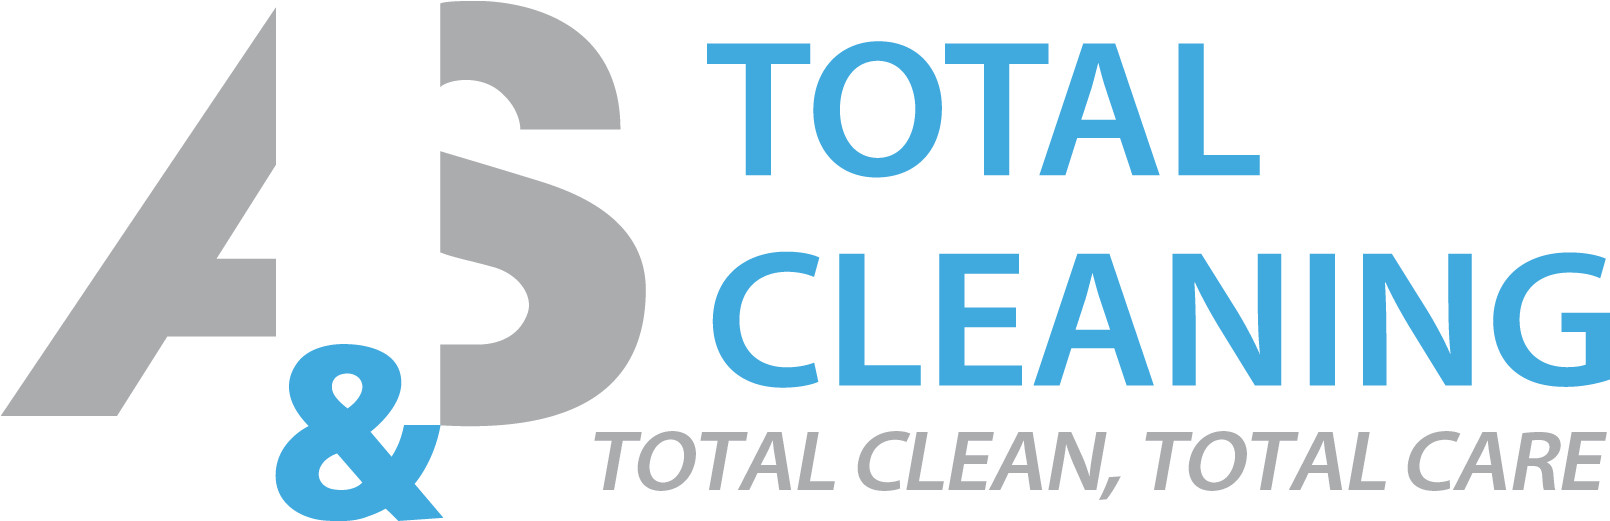 A And S Total Cleaning Official Logo - Clean Care Cleaning Services (1620x521), Png Download